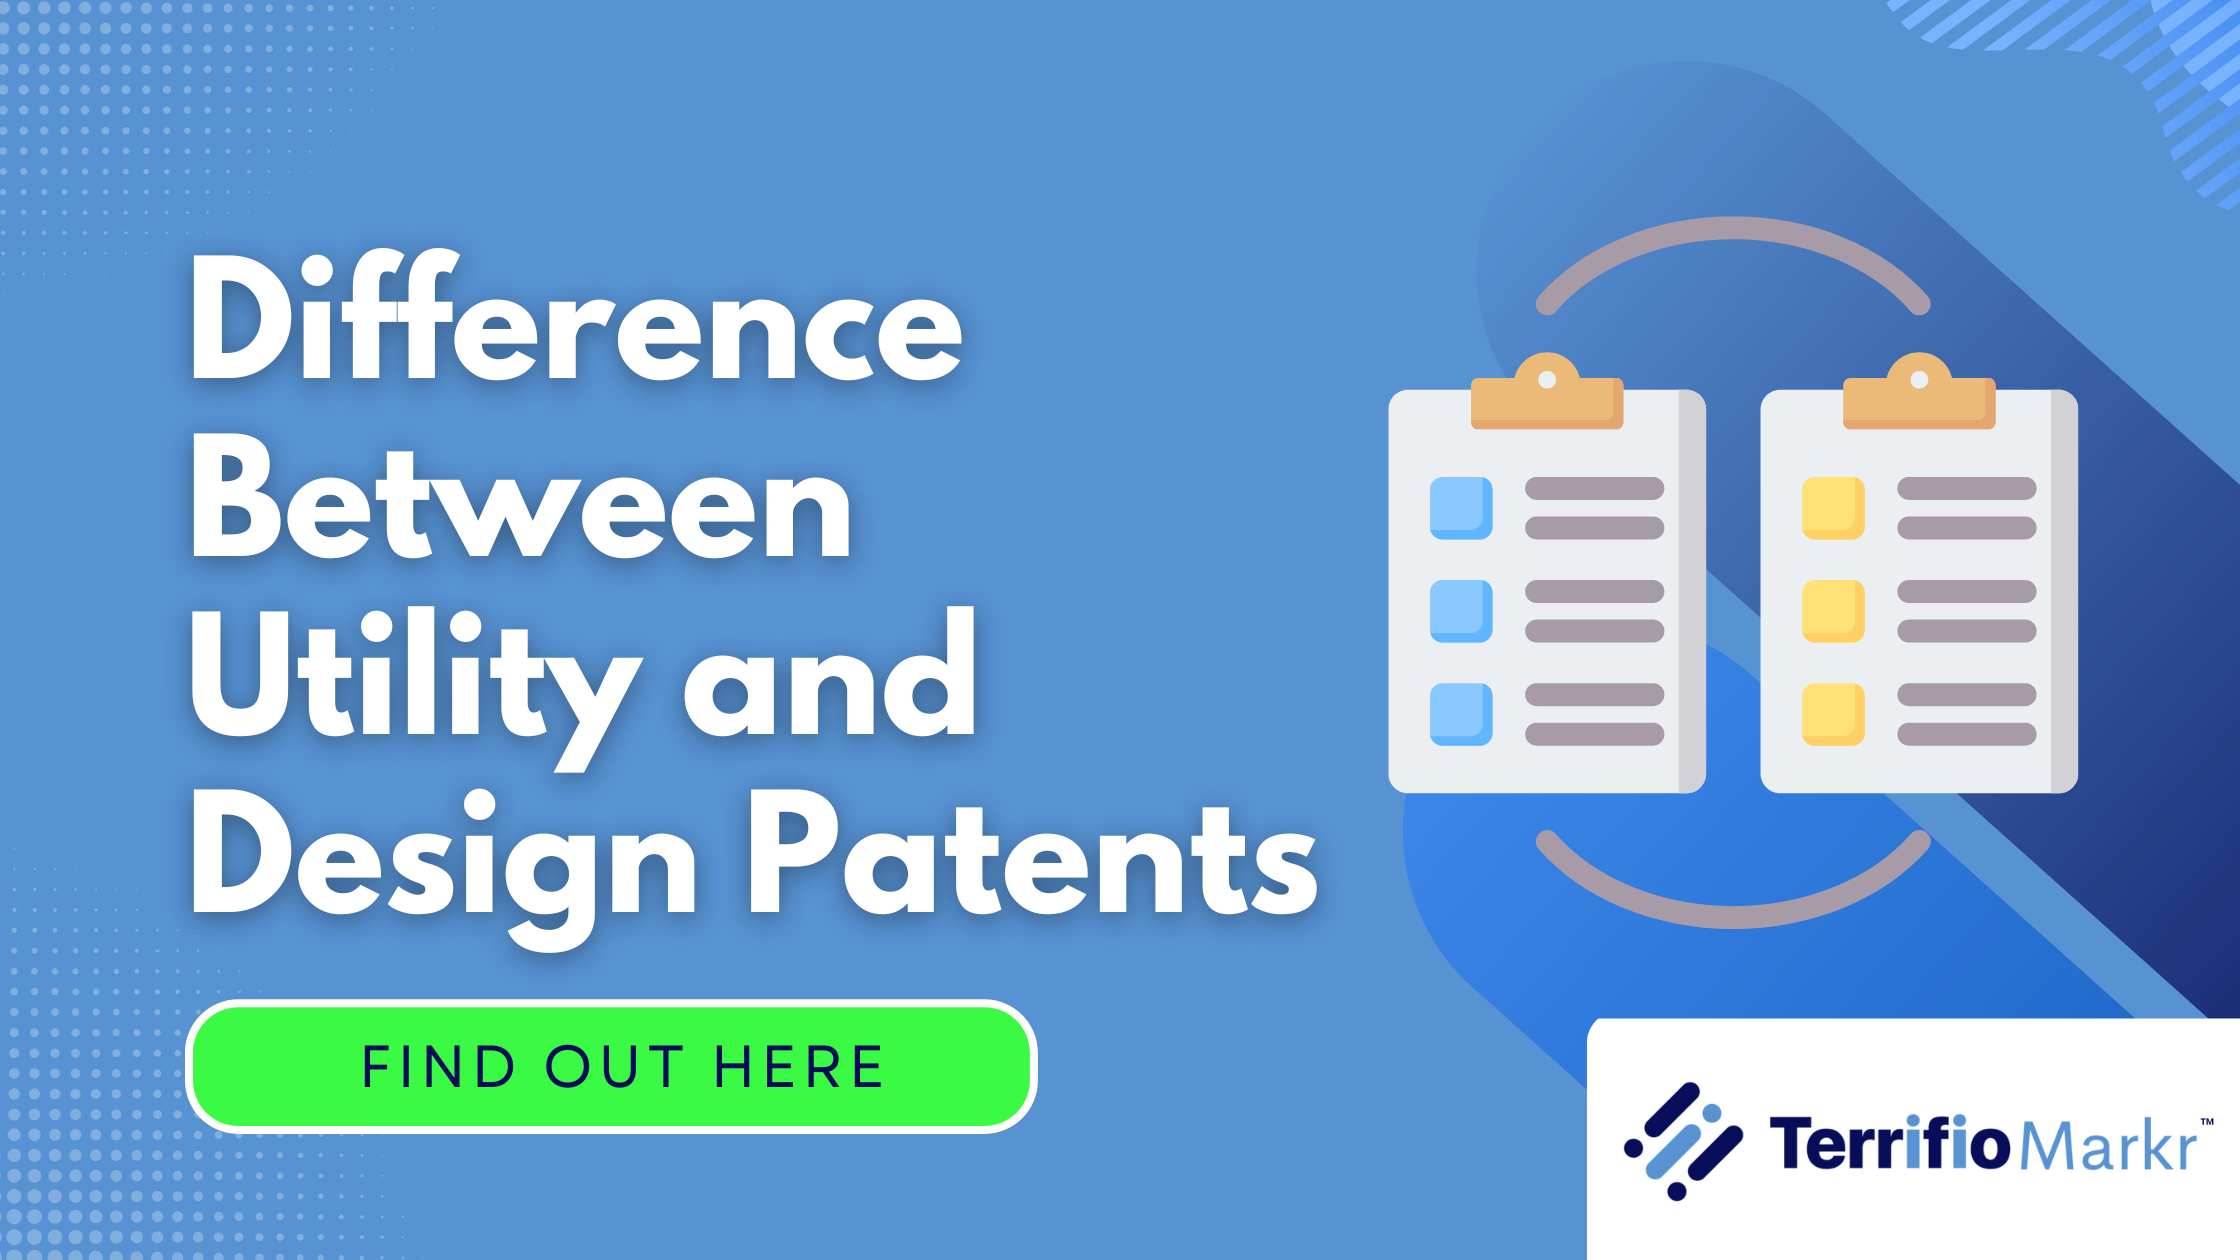 Difference Between Utility and Design Patents